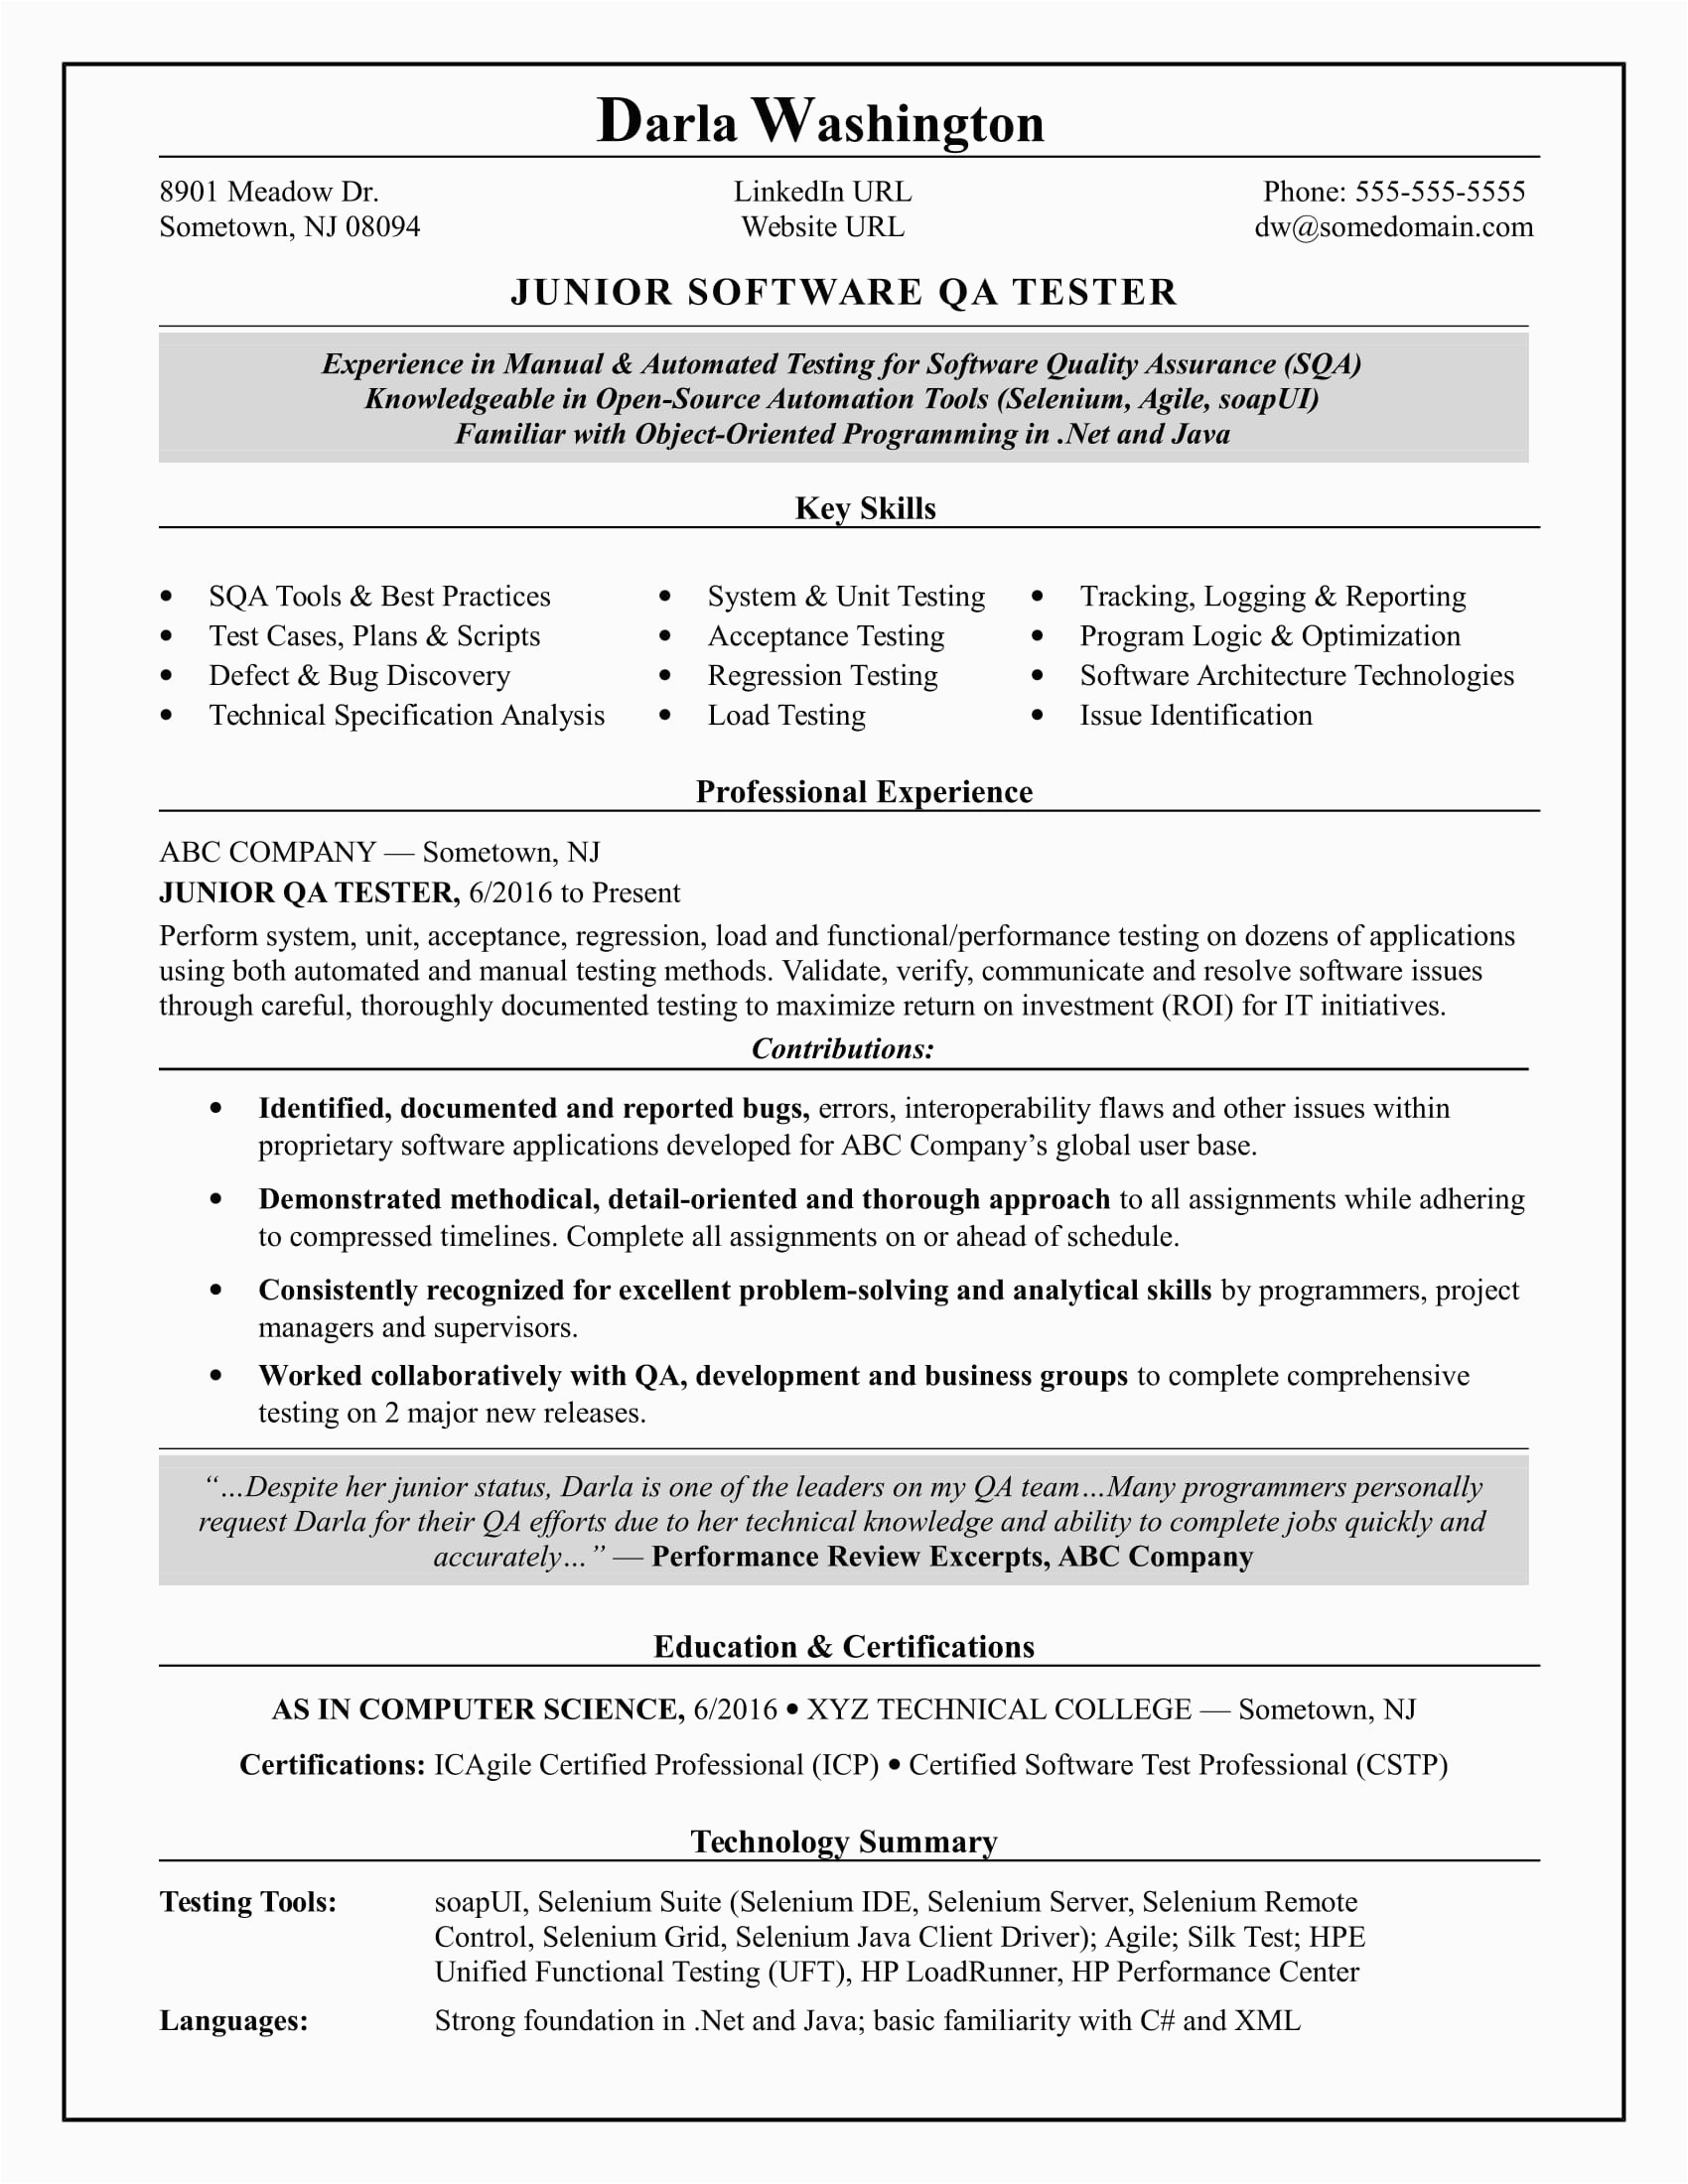 Sample Resume for An Entry Level Qa software Tester Entry Level Qa software Tester Resume Sample